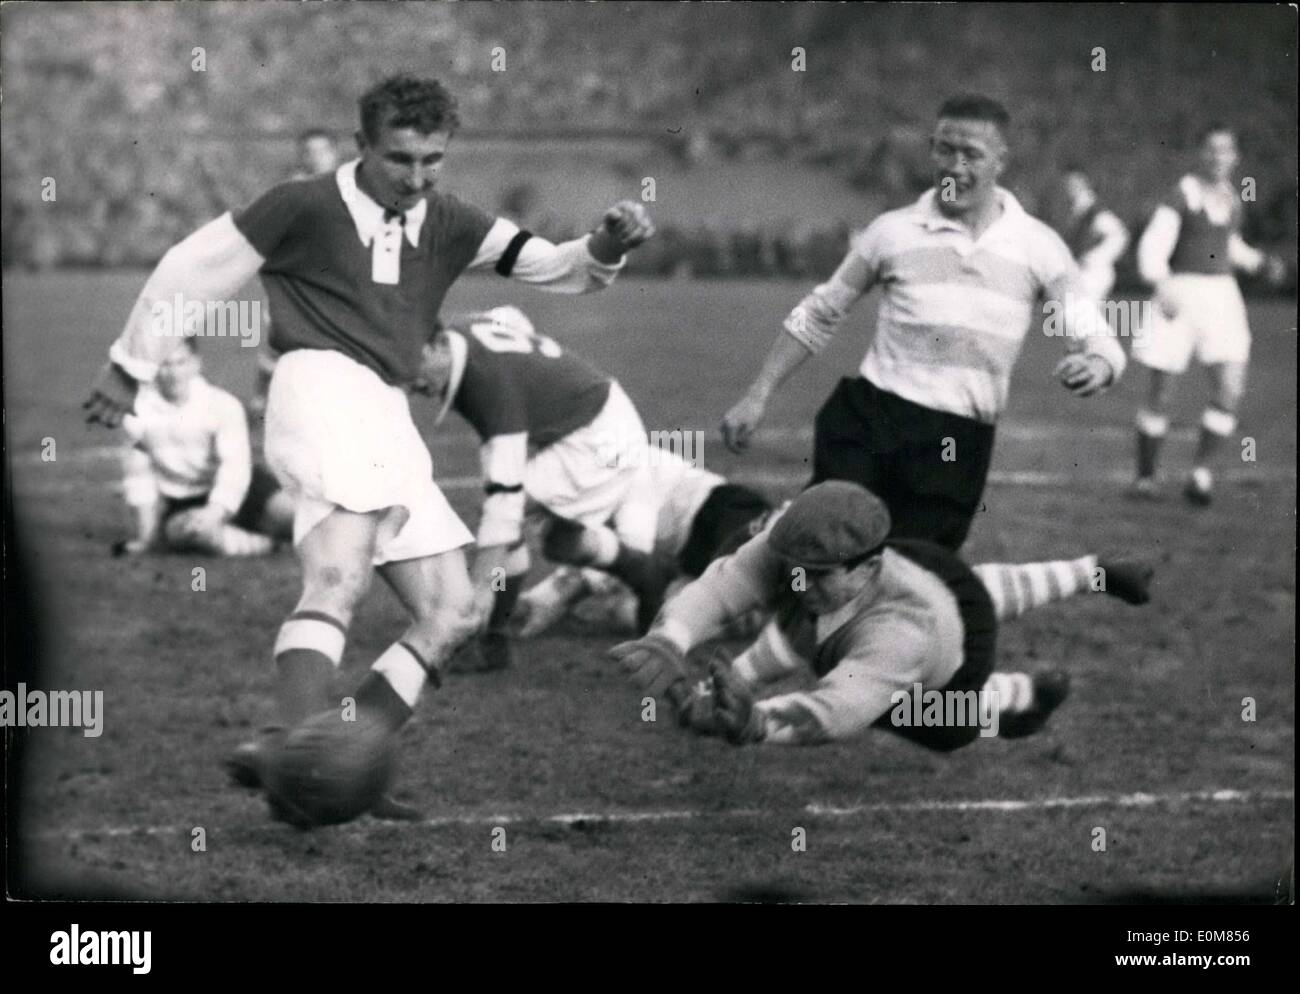 Jan. 17, 1954 - Reims beat Racing 6 to 2. Dubreucq is behind Pavois in the picture.P Stock Photo